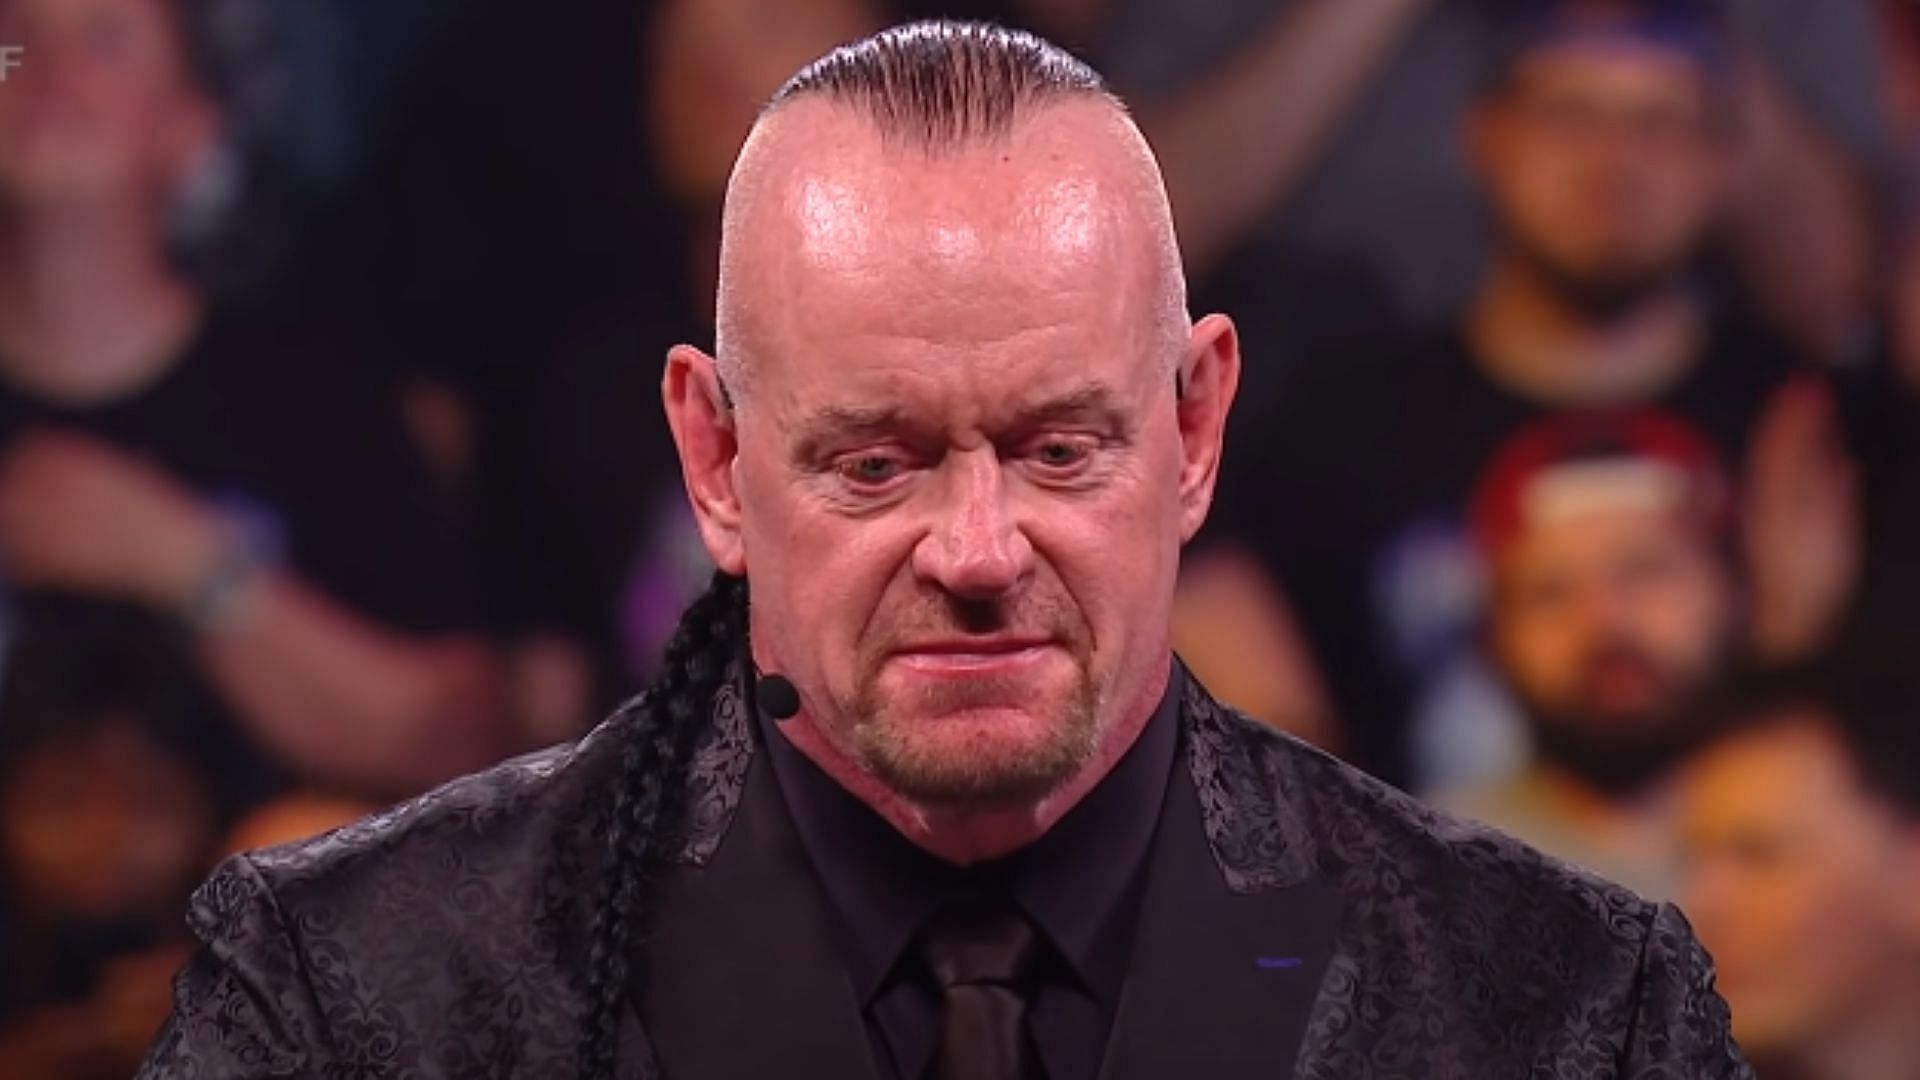 The Undertaker did not want to break character during his WWE career.